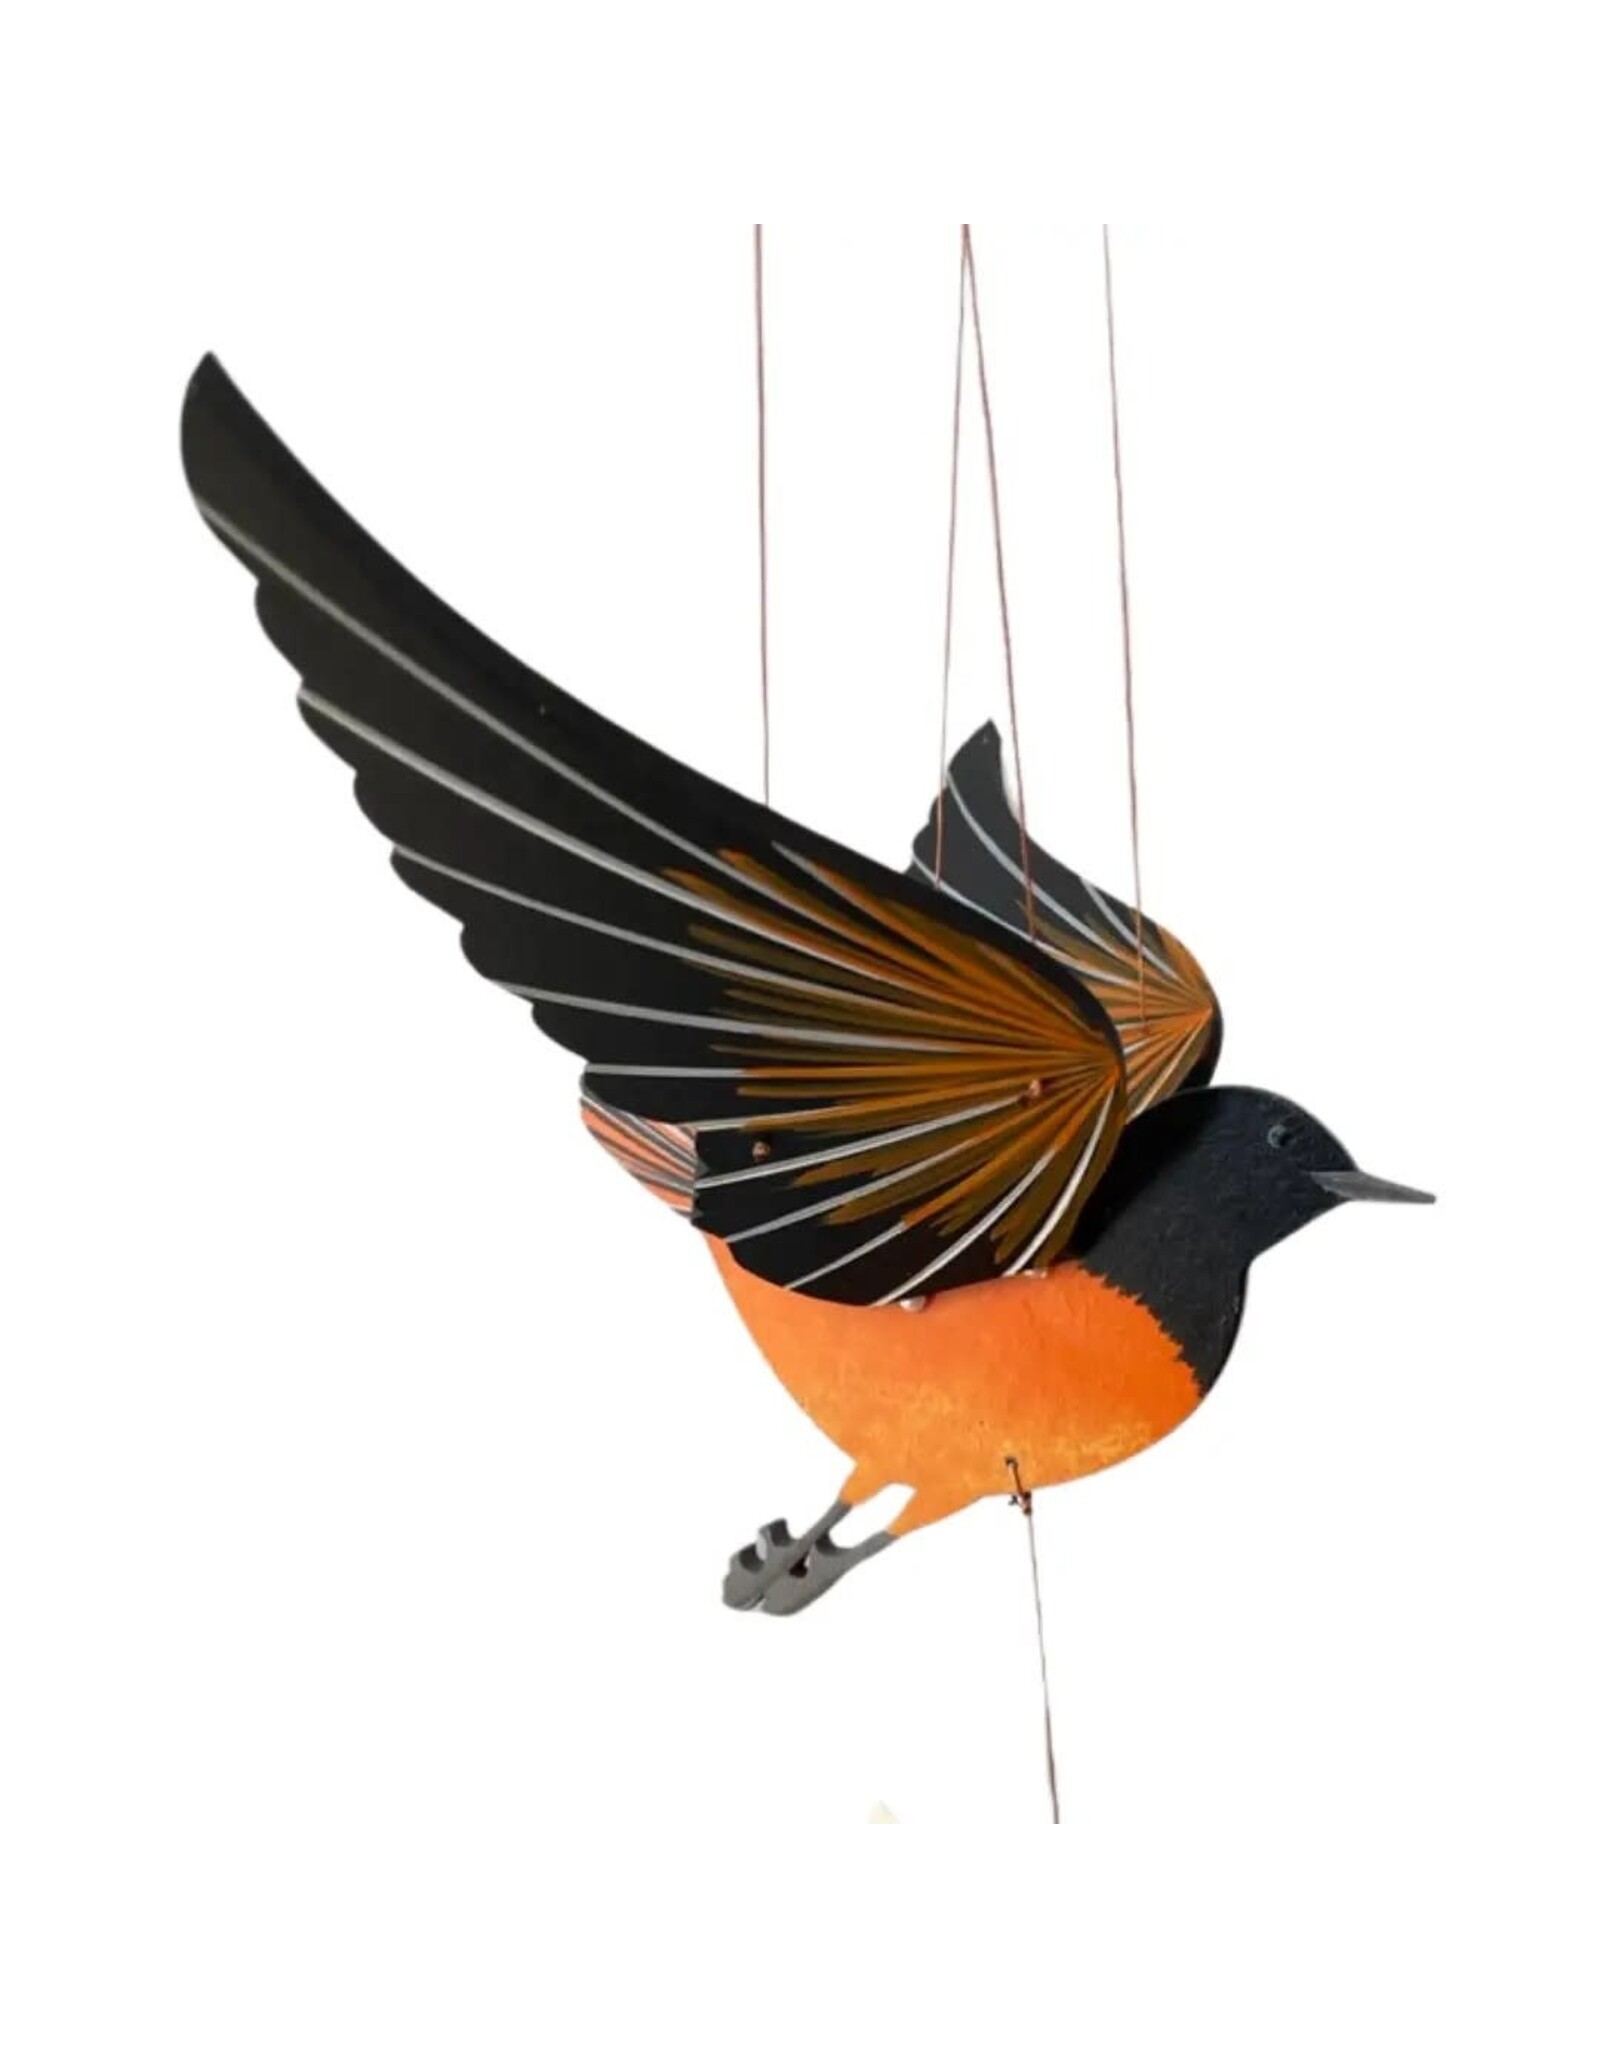 Oriole Flying Mobile, Colombia